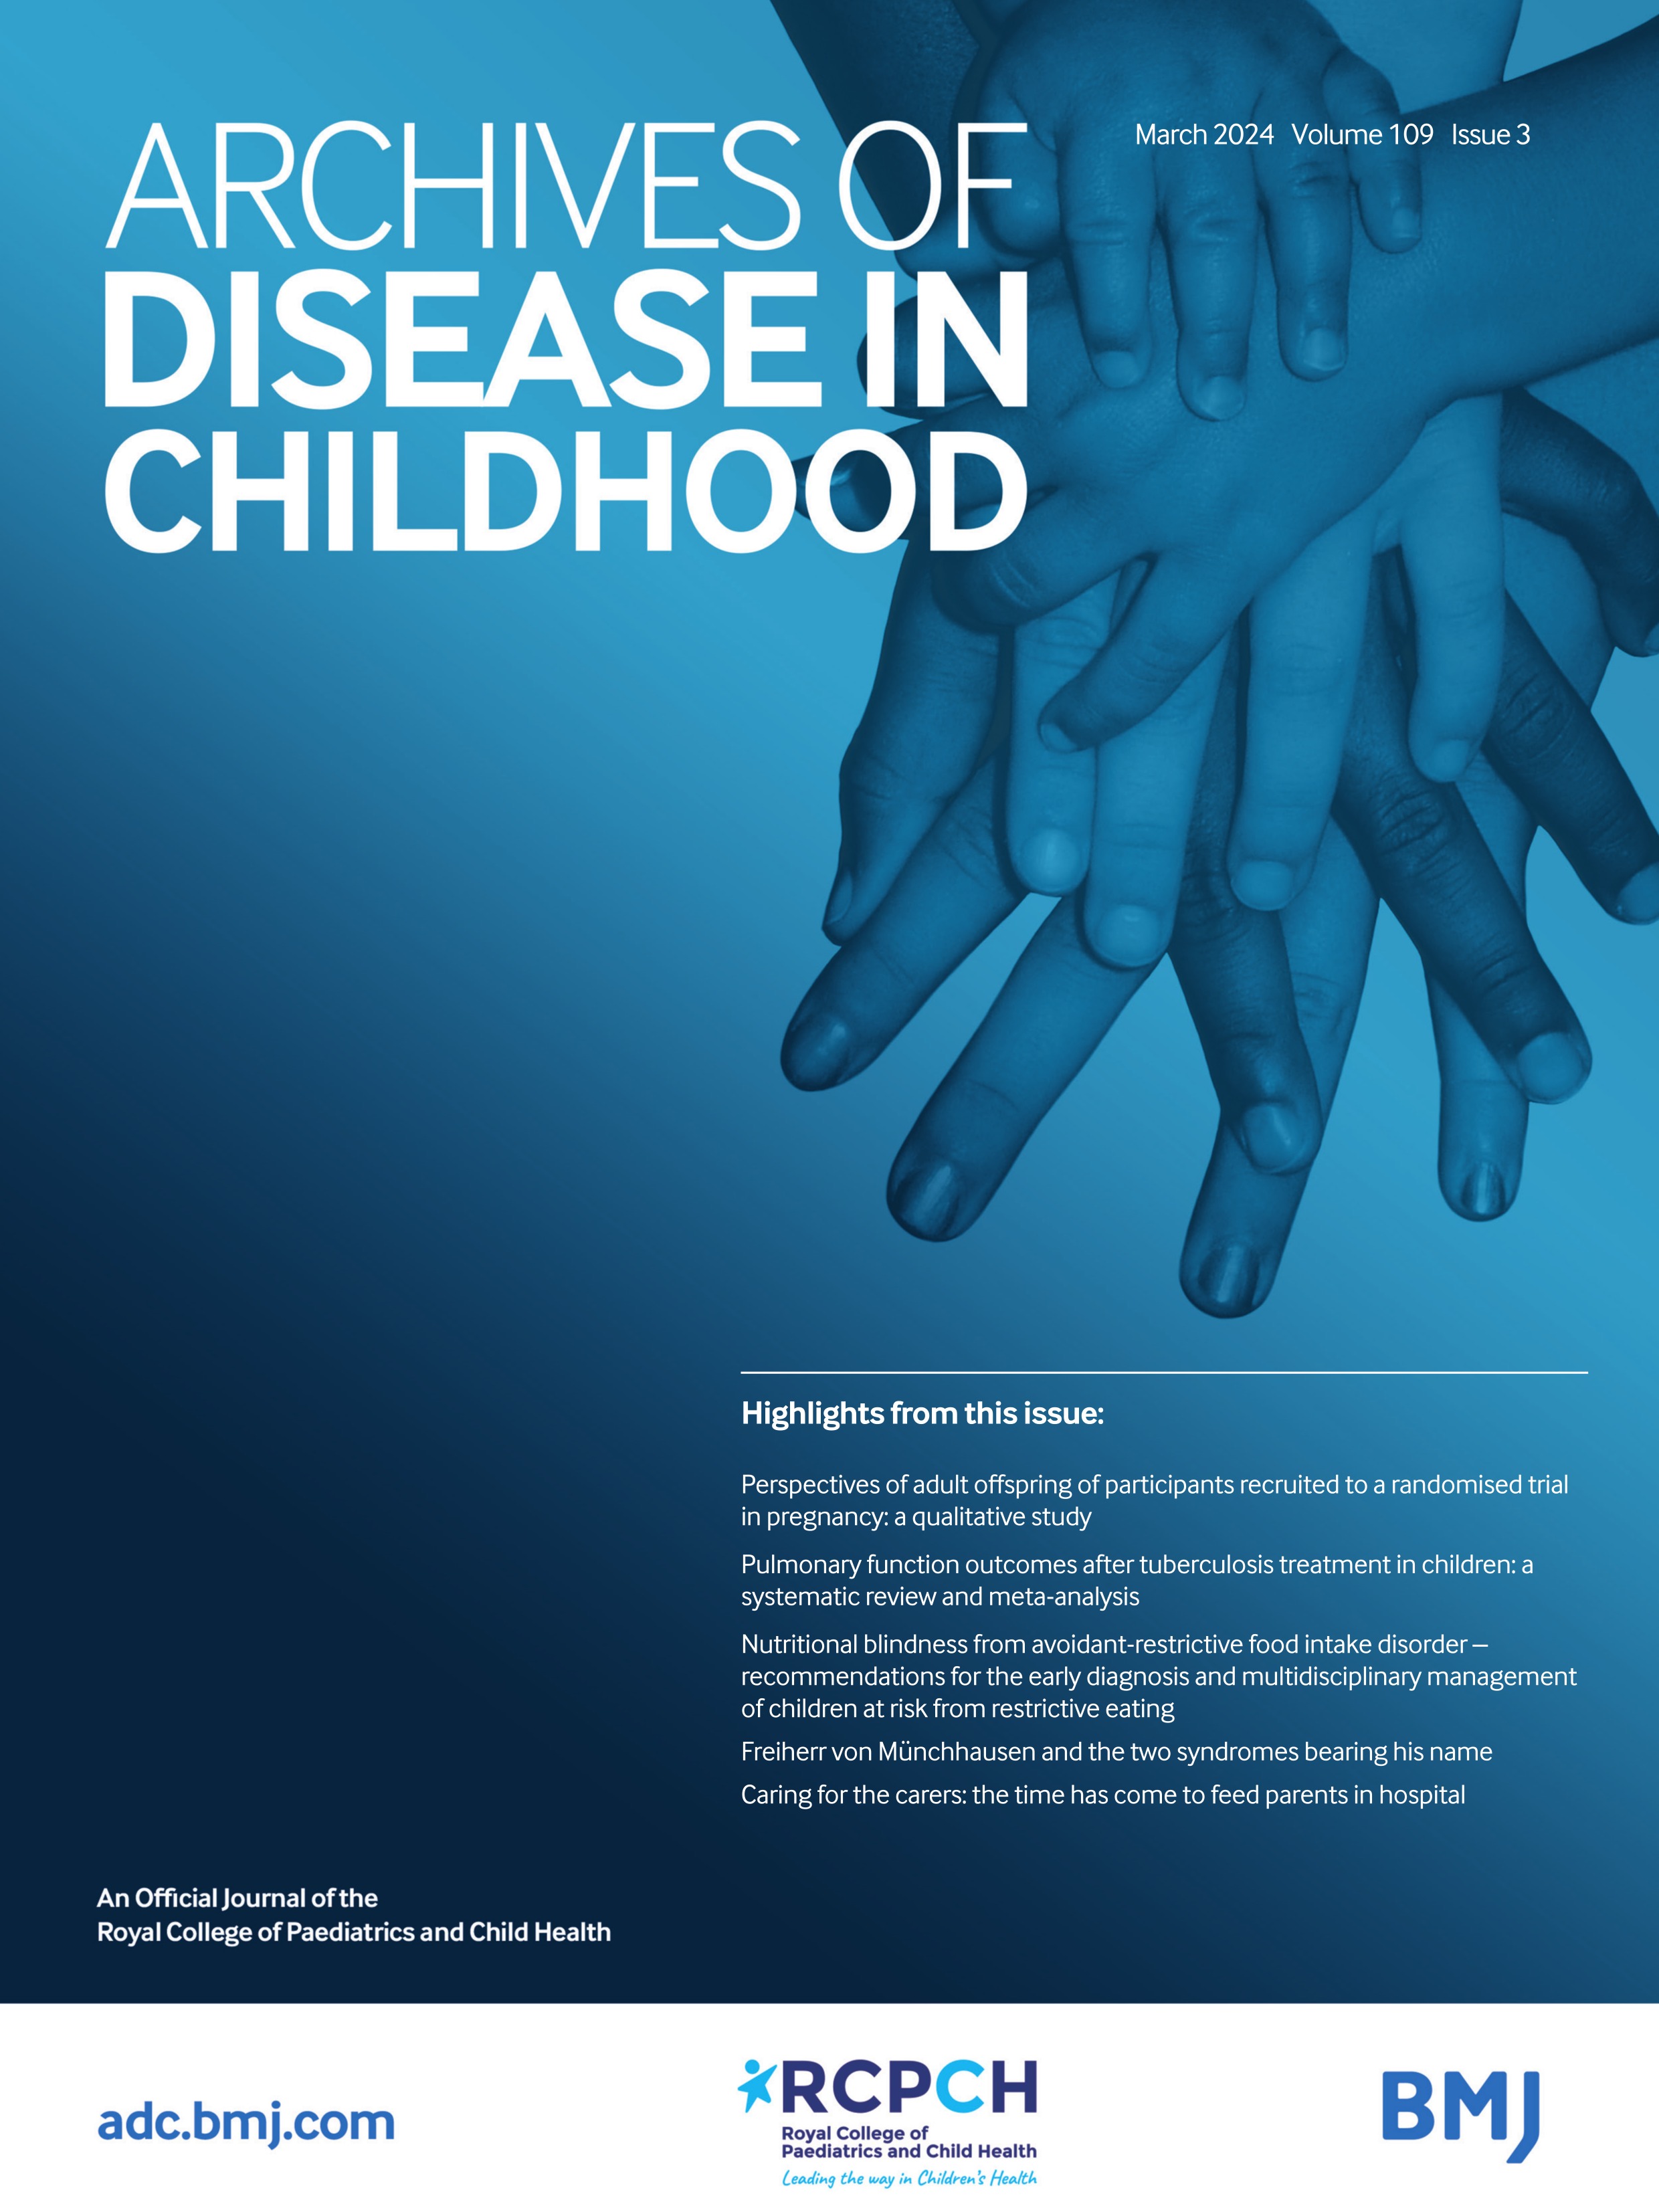 Genotype-phenotype correlations in paediatric and adolescent phaeochromocytoma and paraganglioma: a cross-sectional study